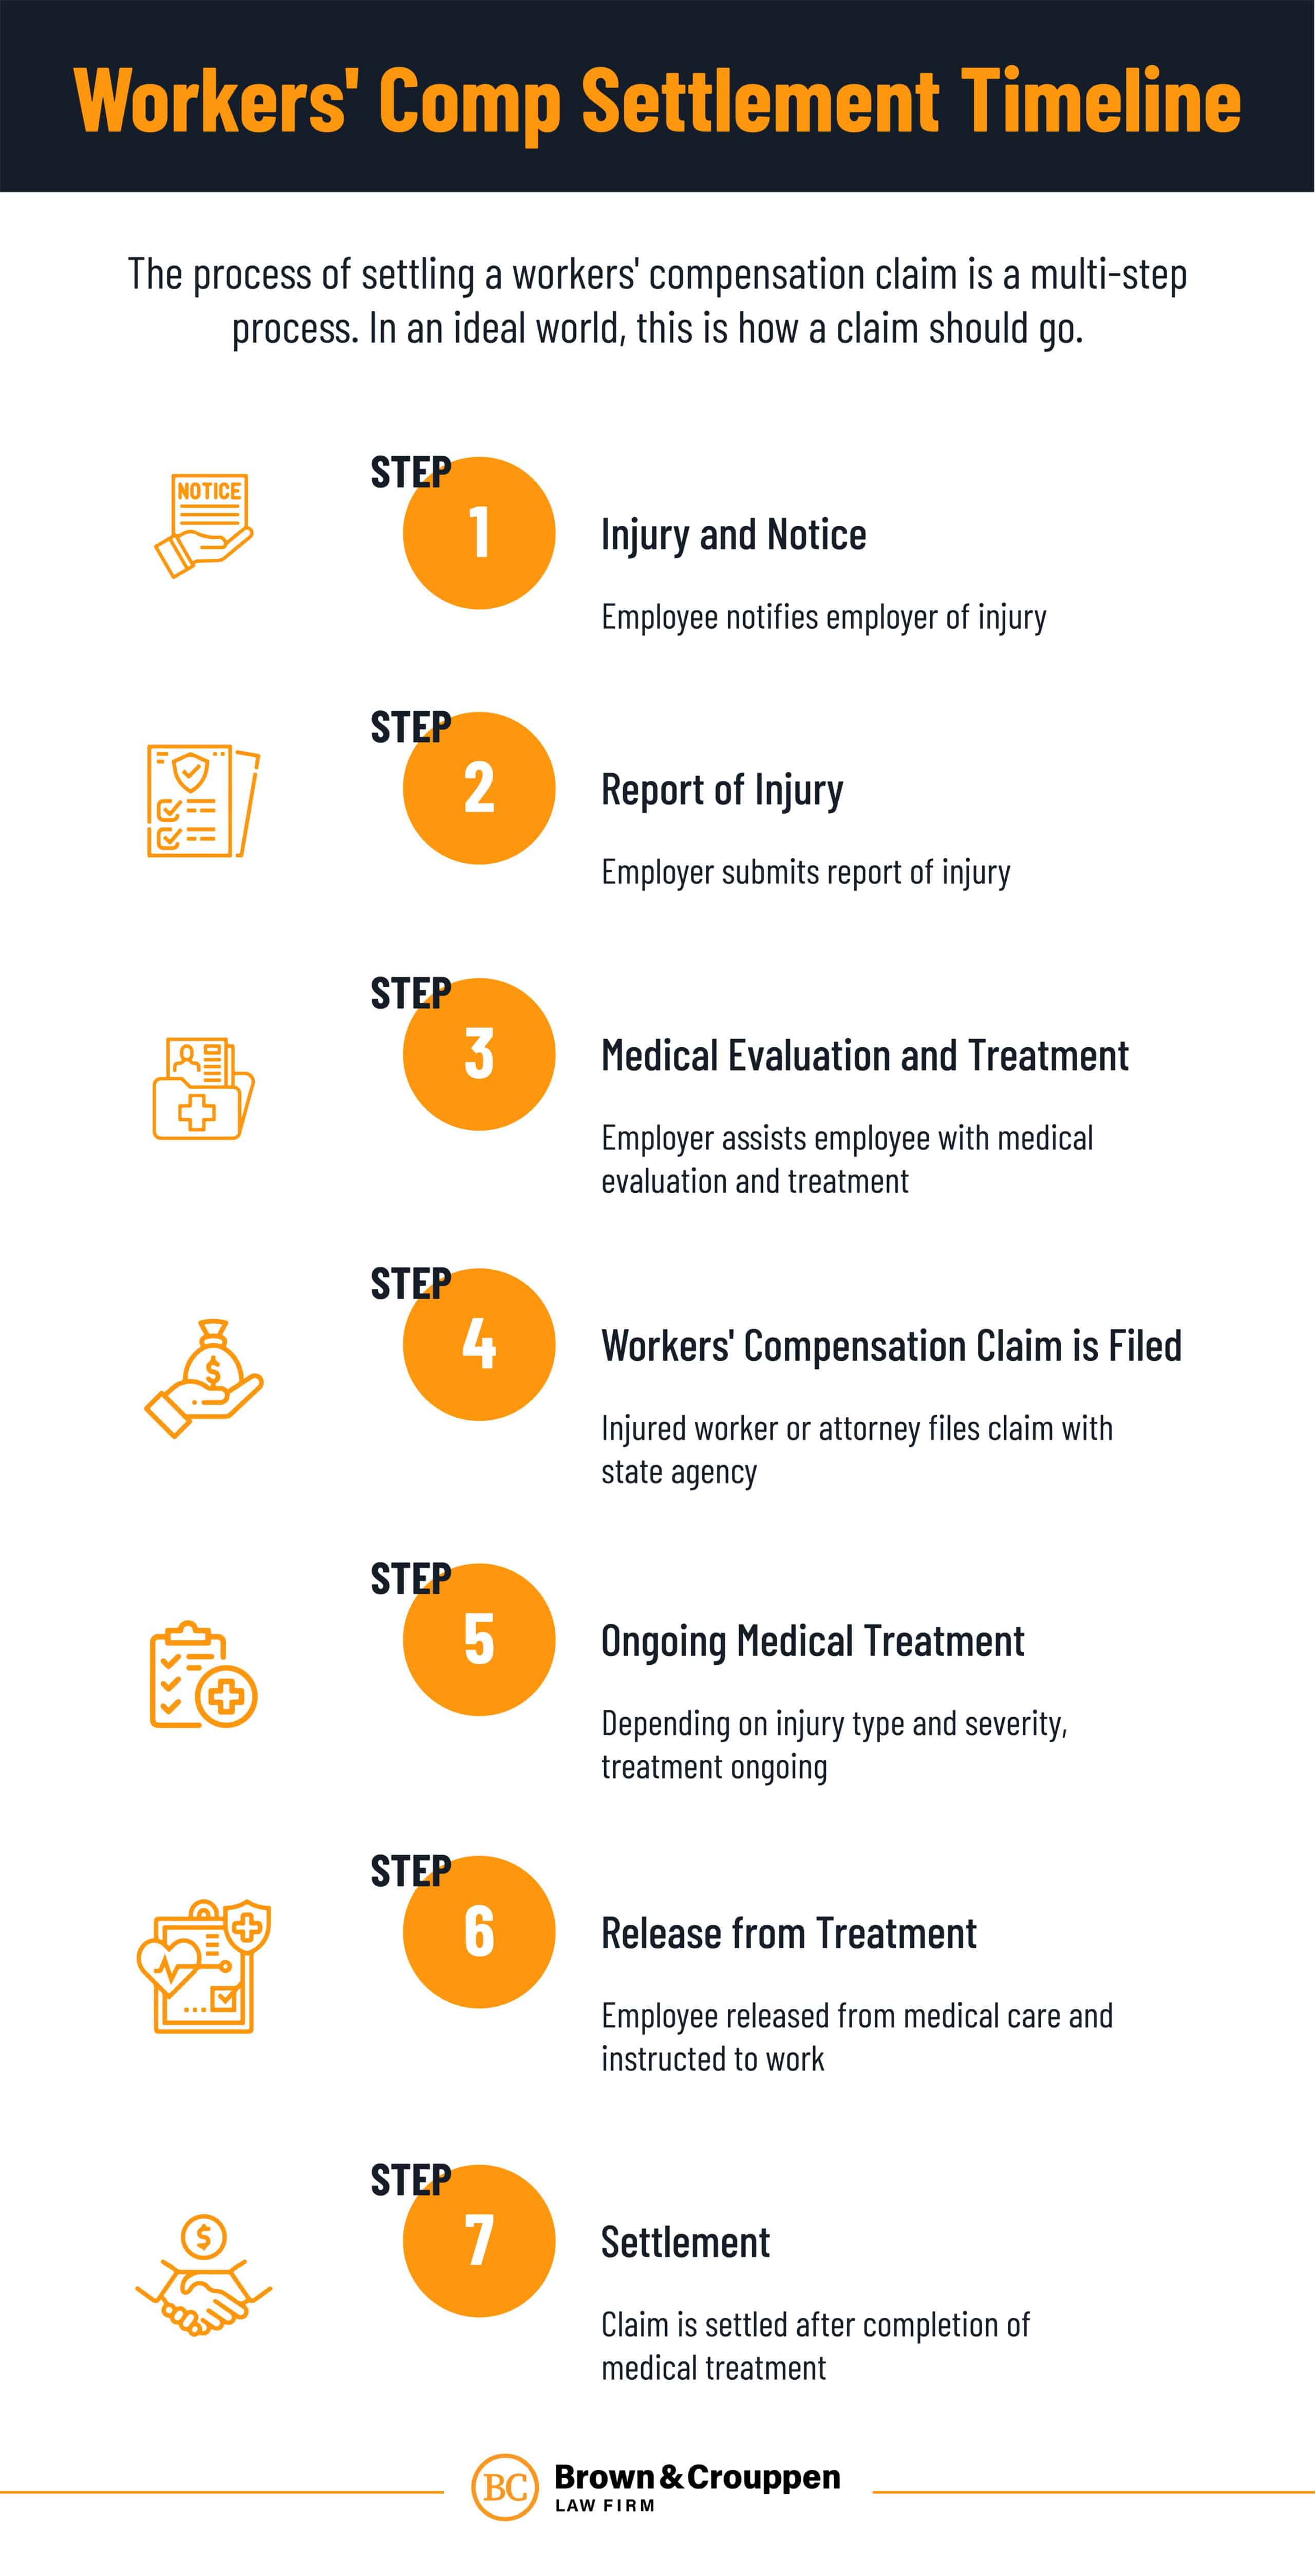 Workers' Comp Settlement Timeline - How Long Do Workers Comp Settlements Take